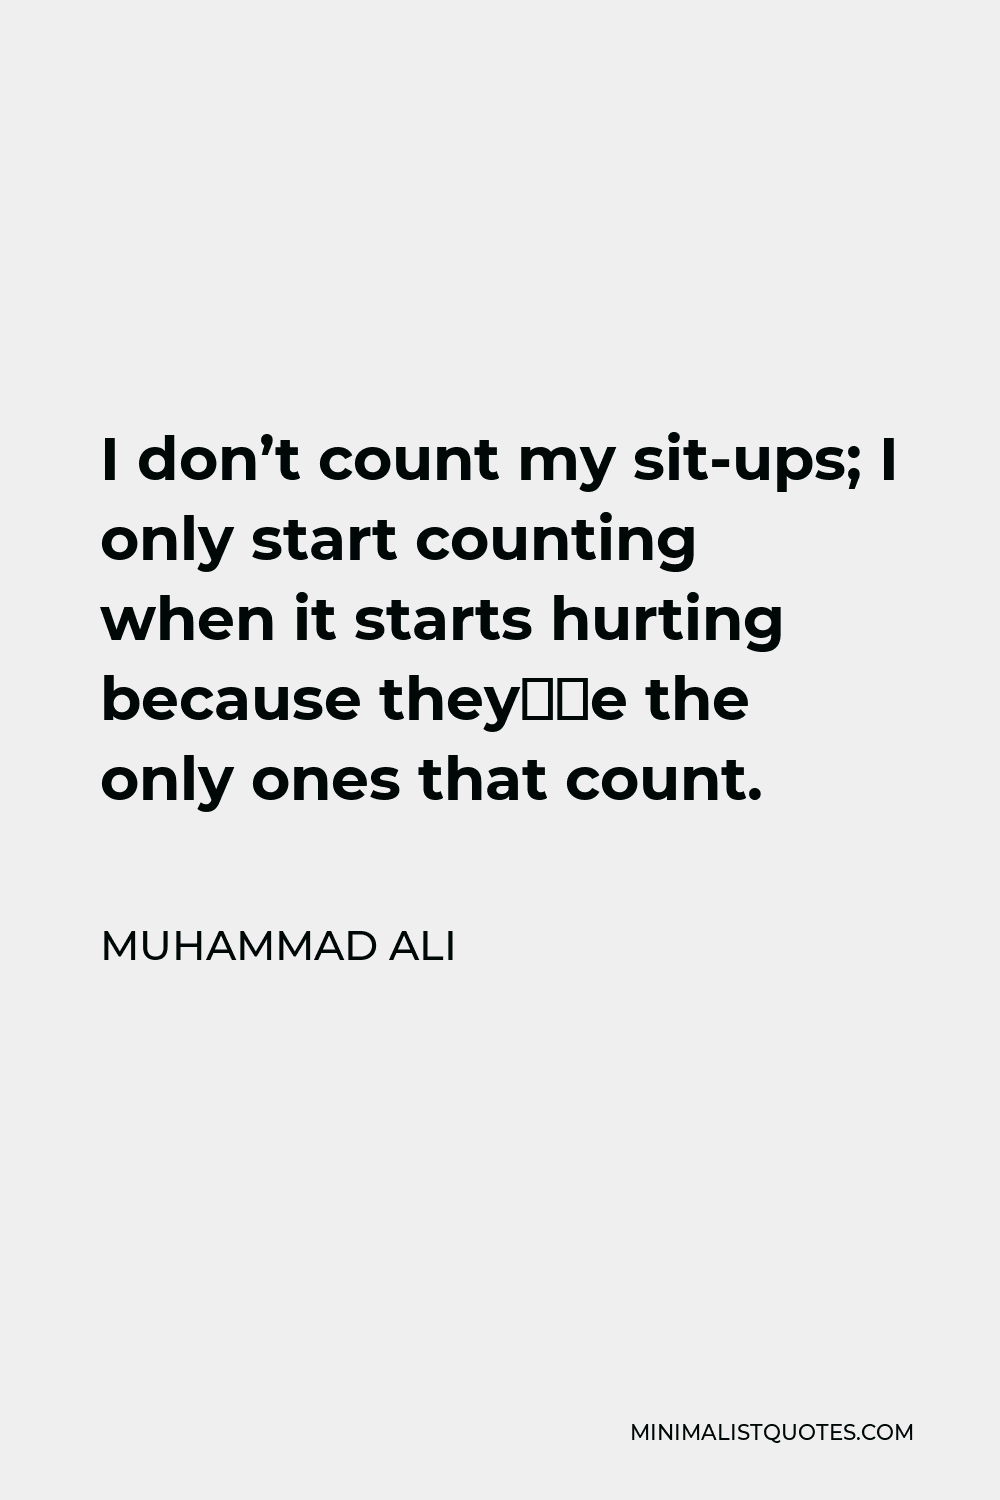 Muhammad Ali Quote - I don’t count my sit-ups; I only start counting when it starts hurting because they’re the only ones that count.